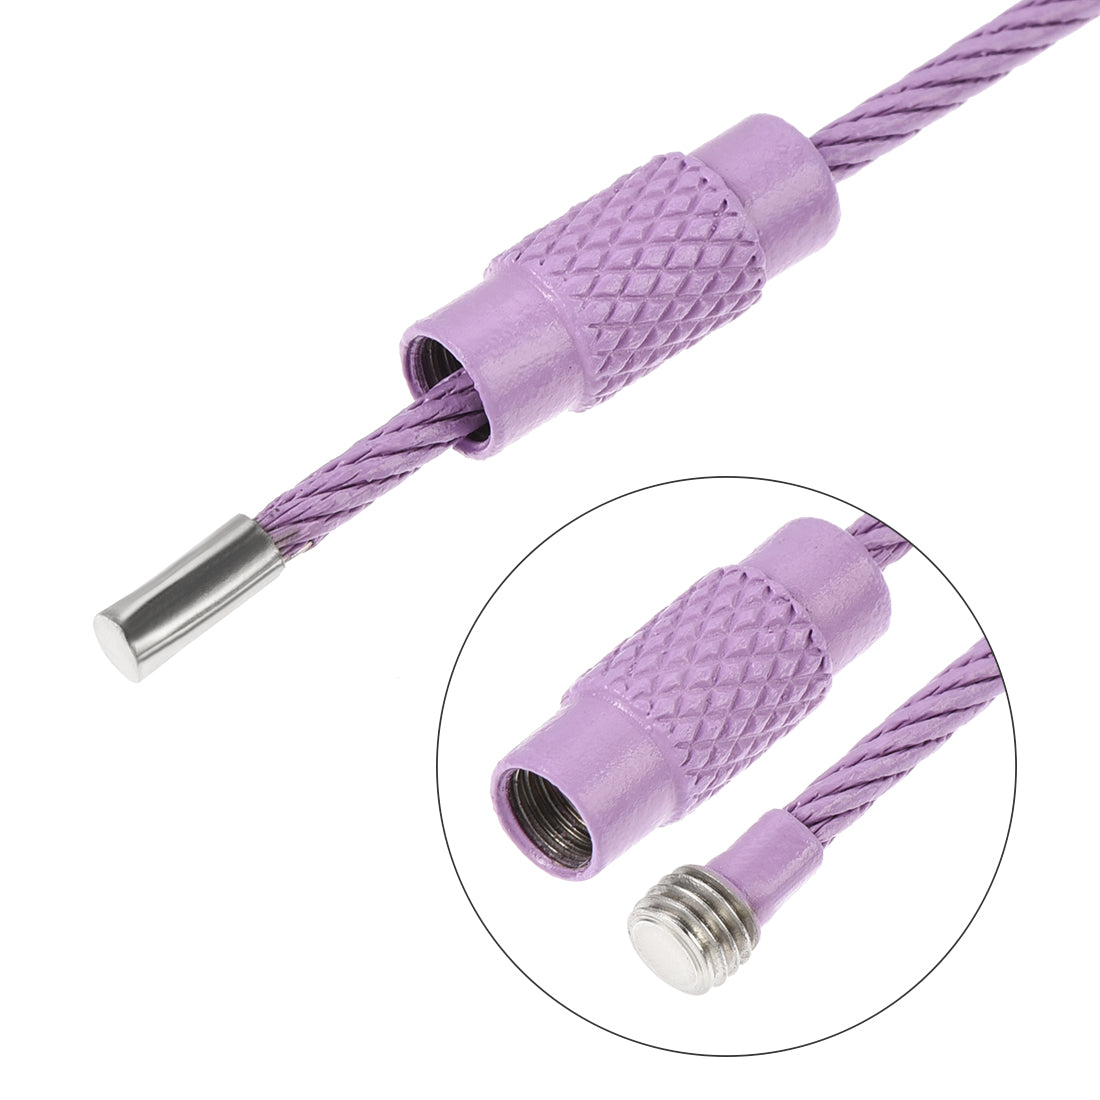 Uxcell Uxcell Wire Keychain 150mm Length Key Ring Loop Cable for Lanyard Zipper Handbag, Spray Painting Stainless Steel, Purple, Pack of 4